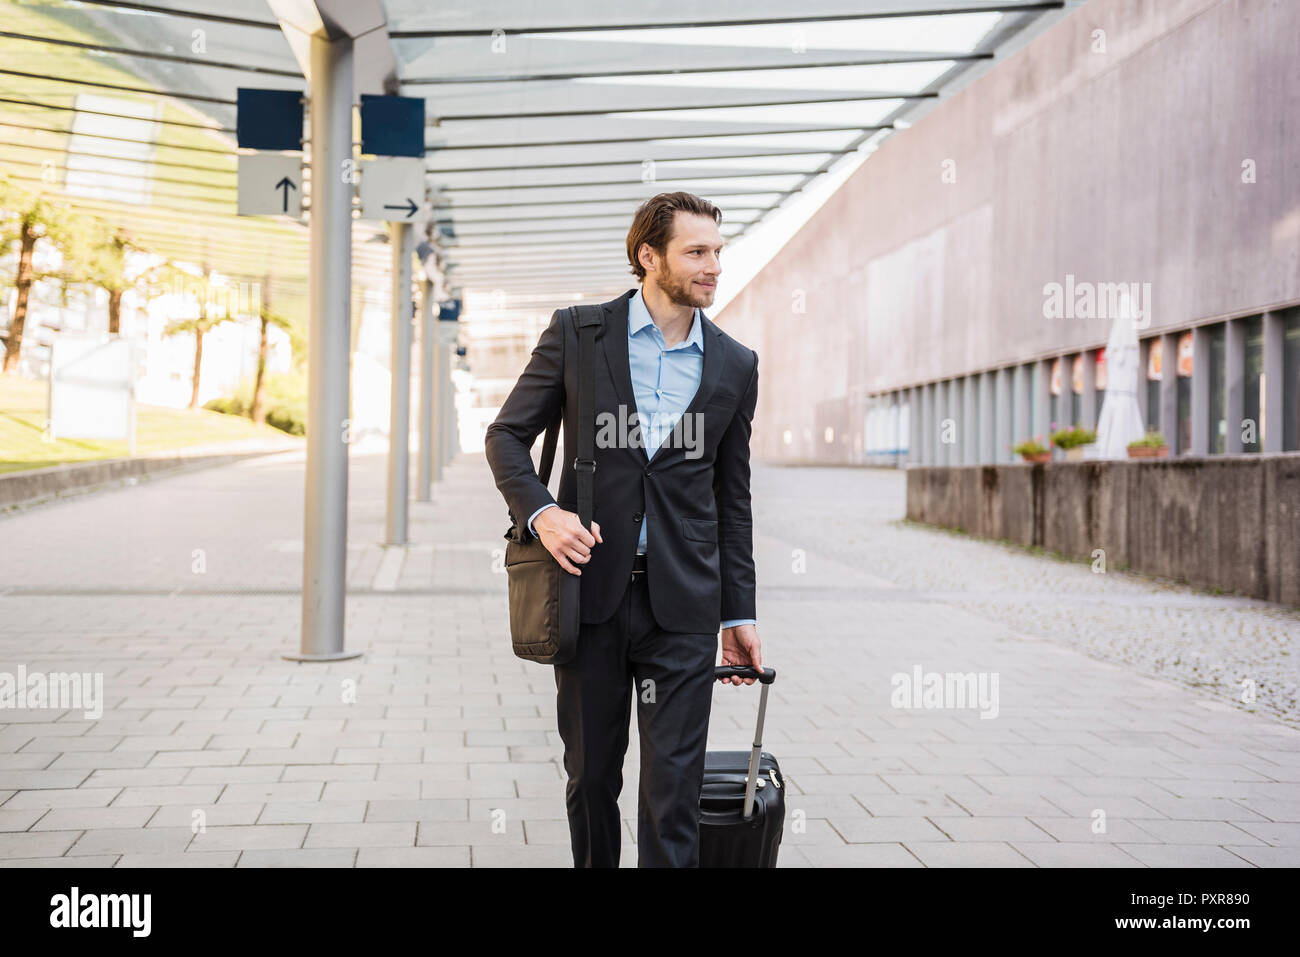 Businessman on the move pushing rolling suitcase Stock Photo